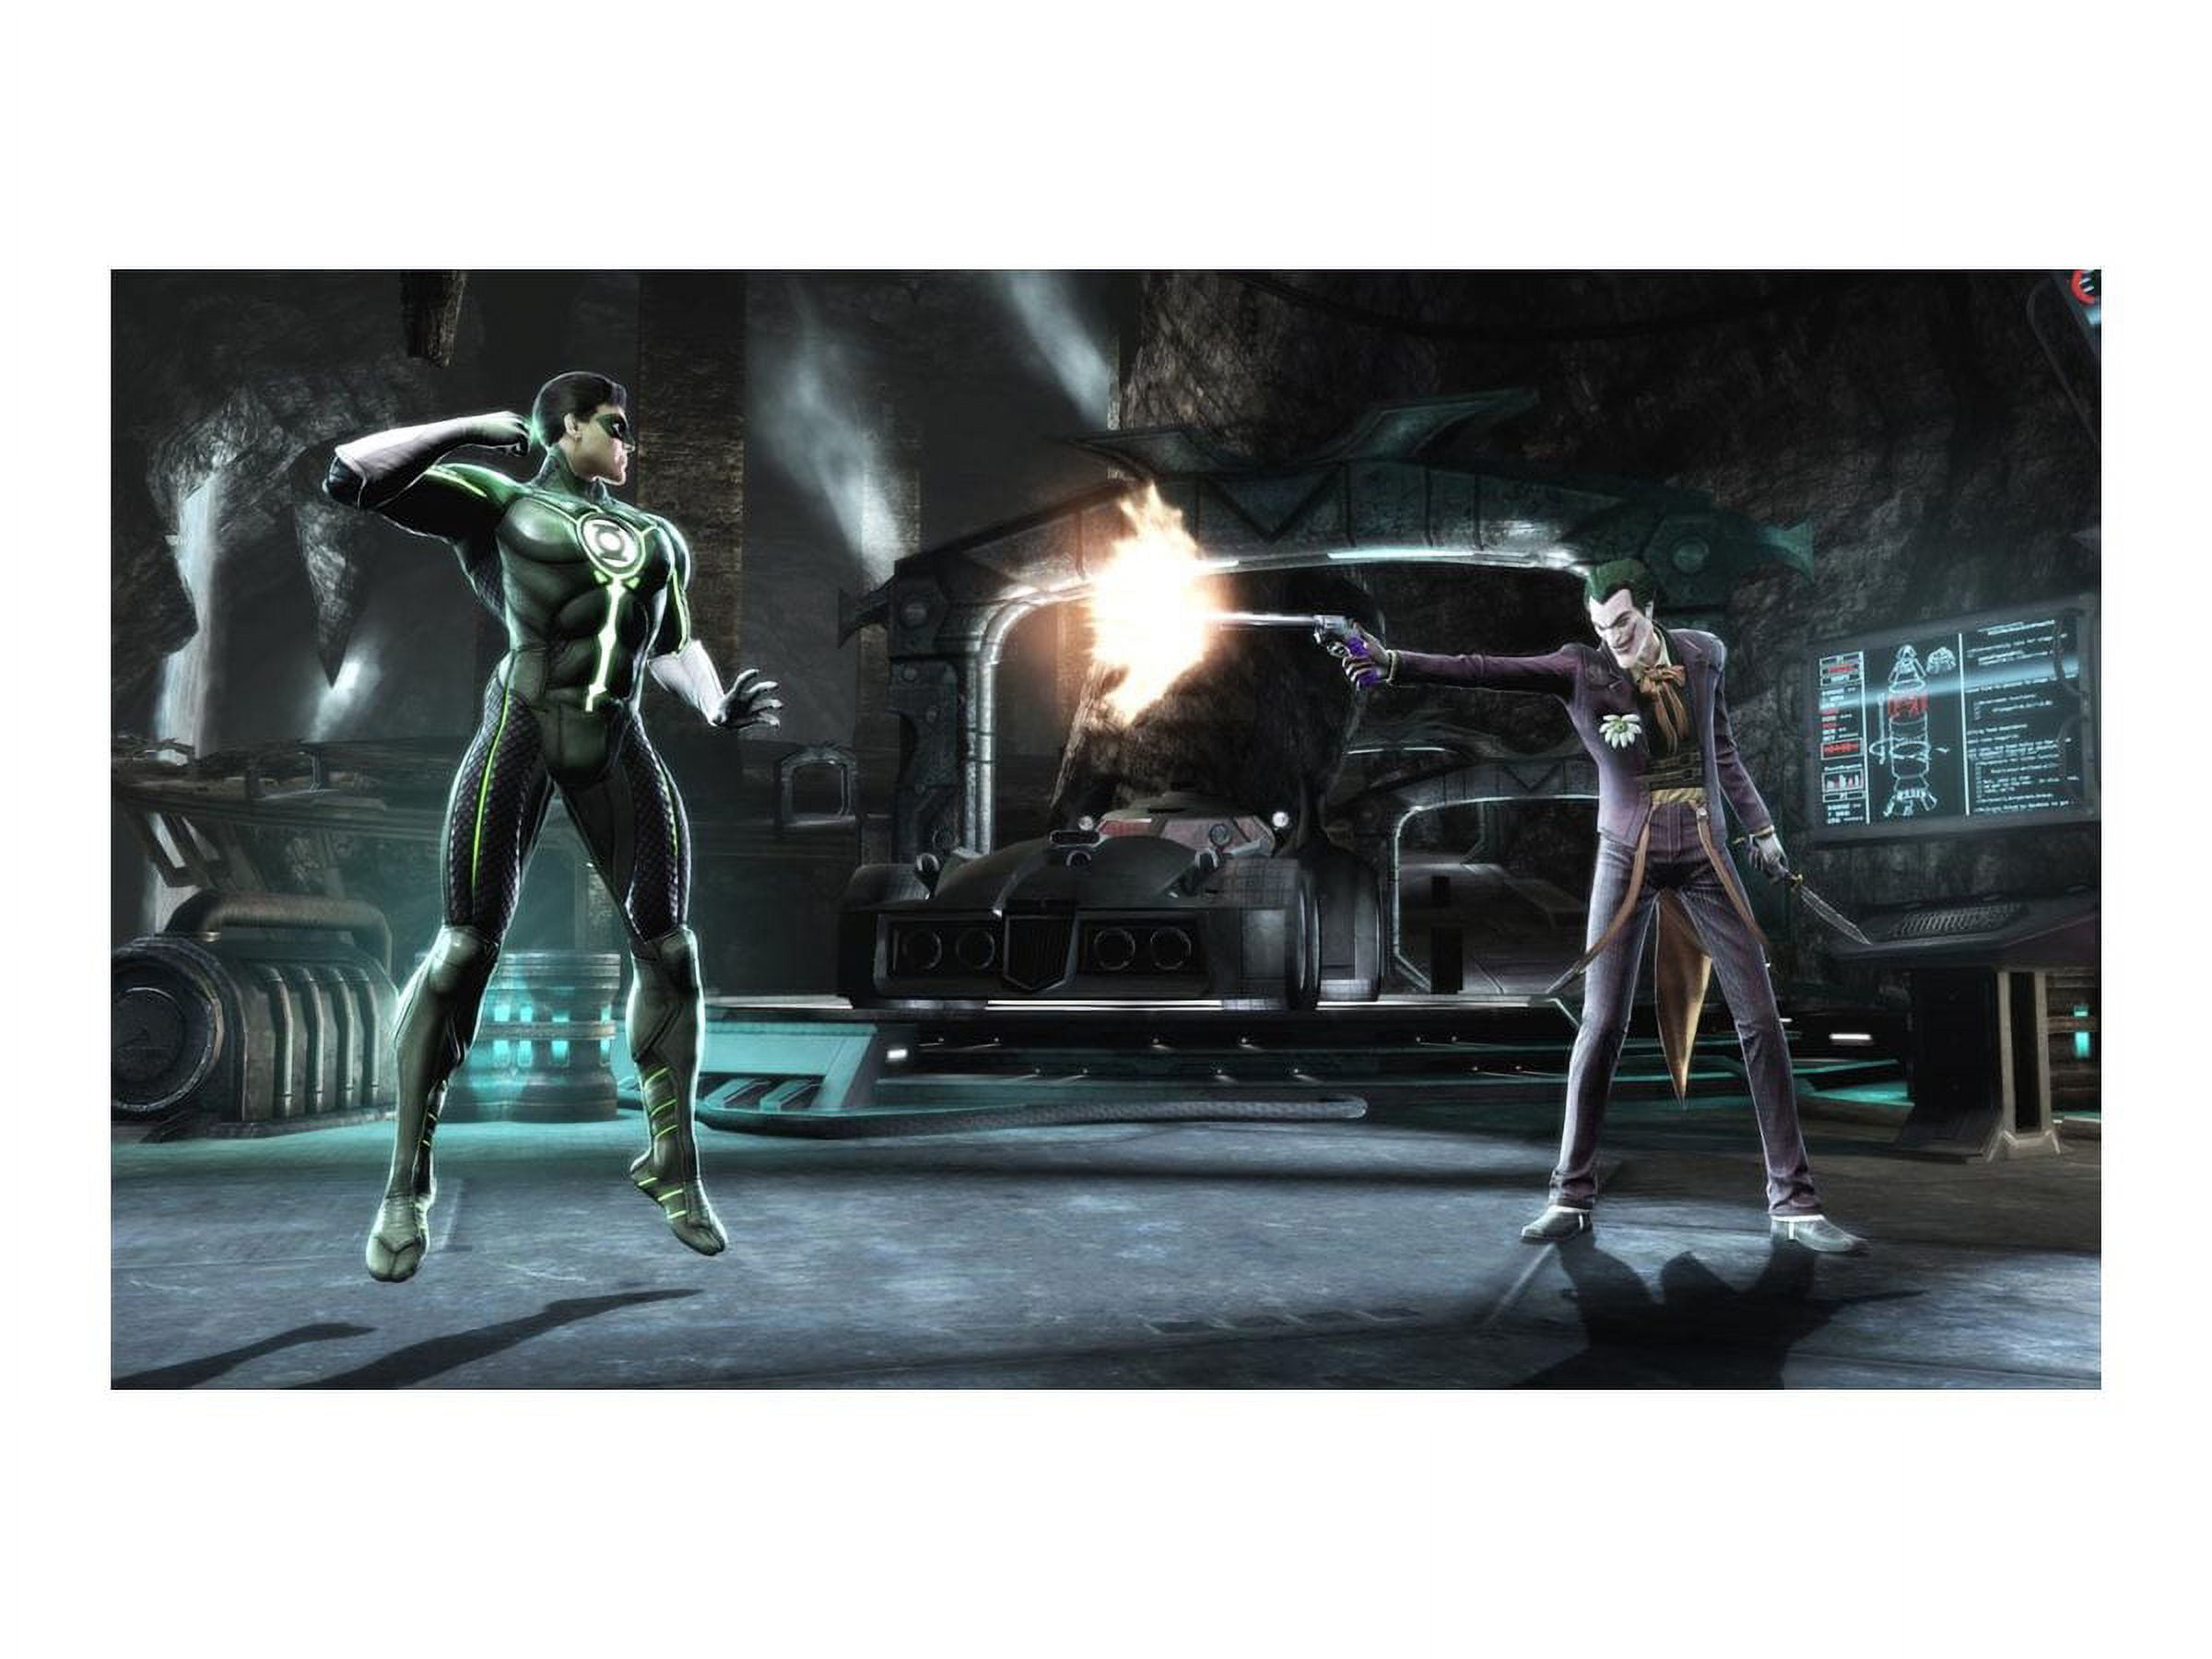 Injustice: Gods Among Us - Ultimate Edition(Microsoft Xbox 360) COMPLETE.  Tested 883929322916